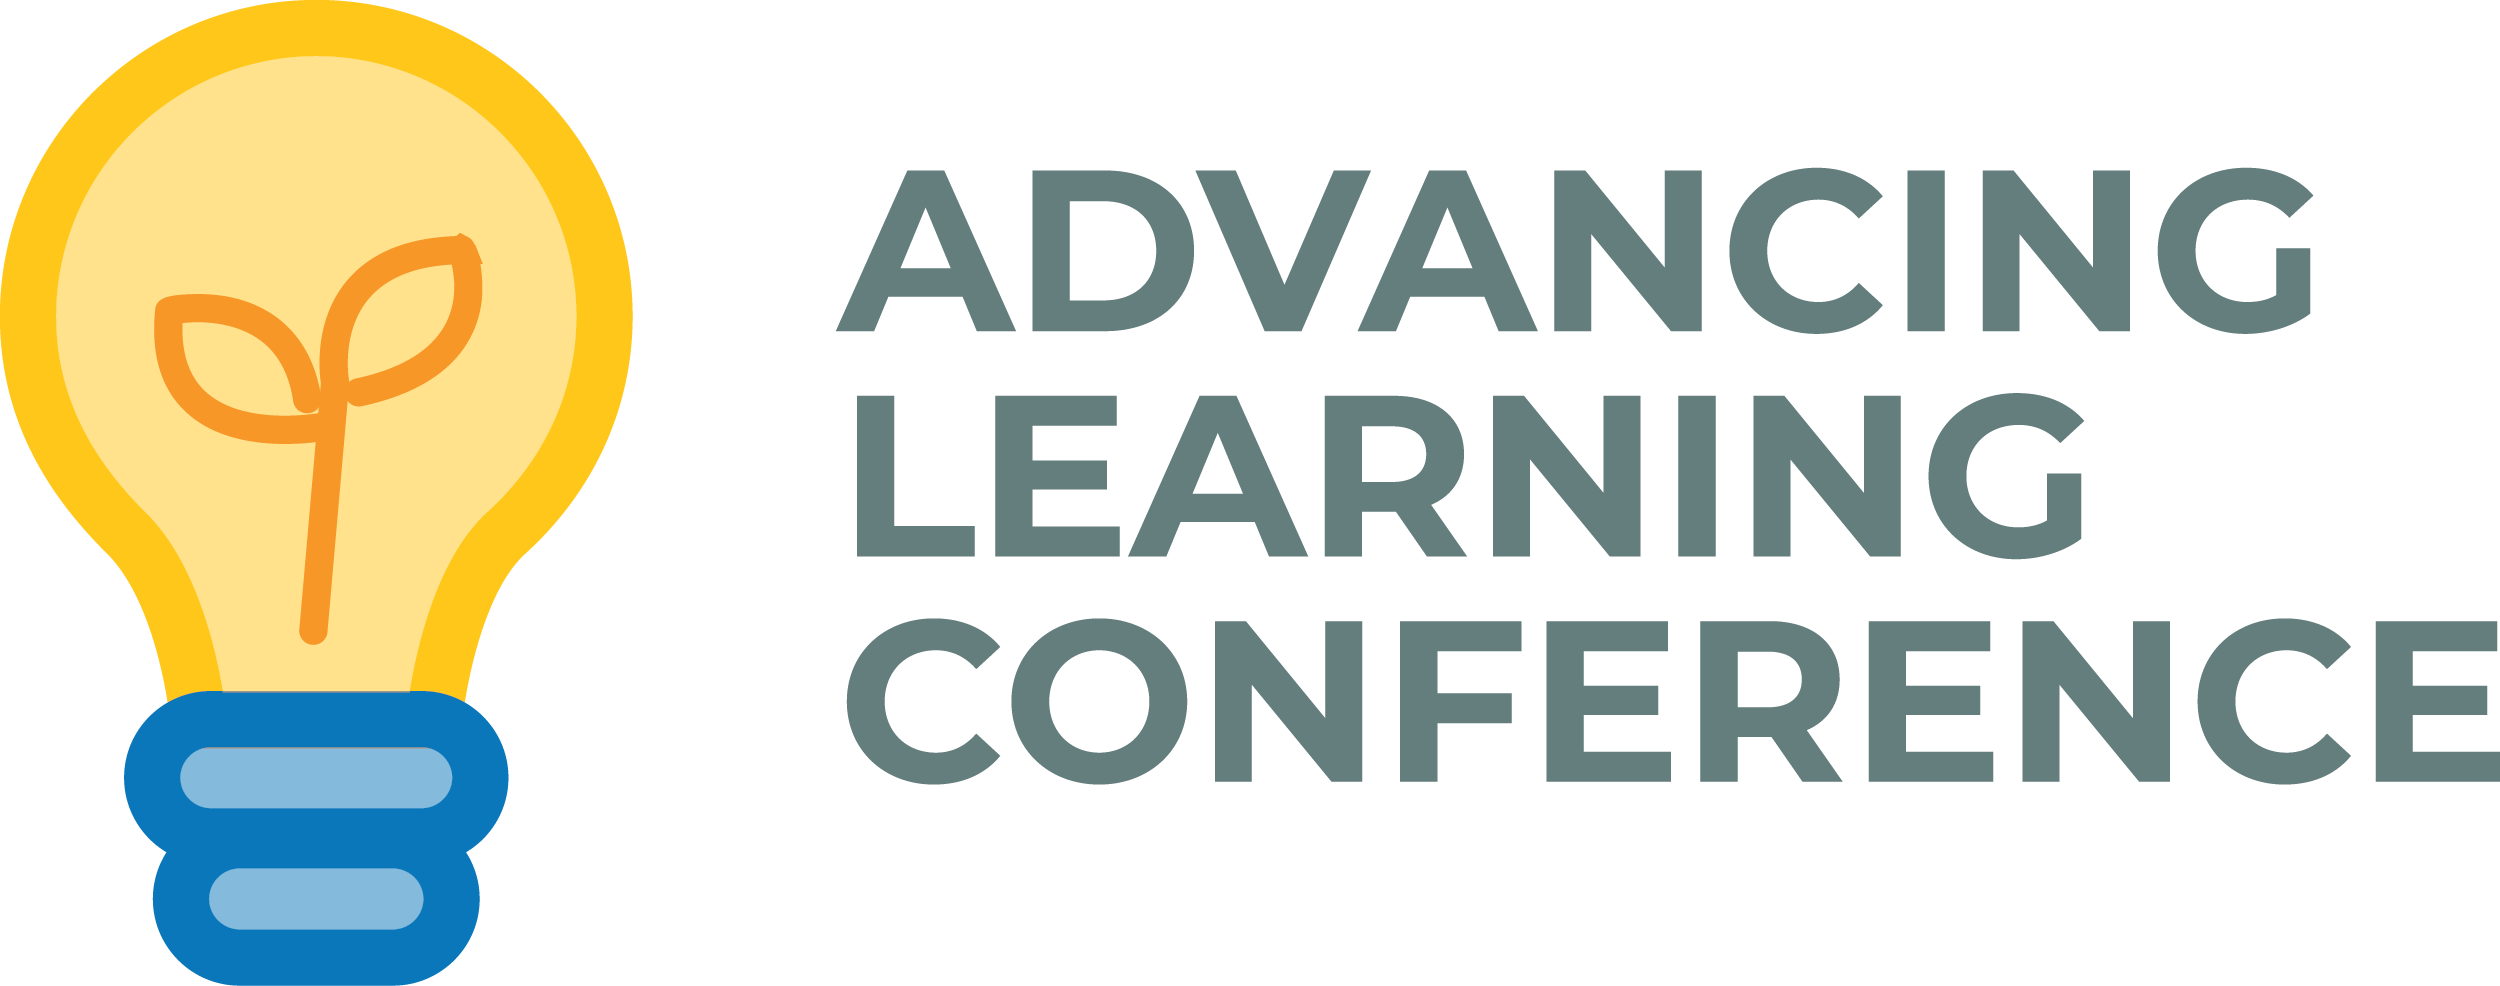 Advancing Learning Conference logo